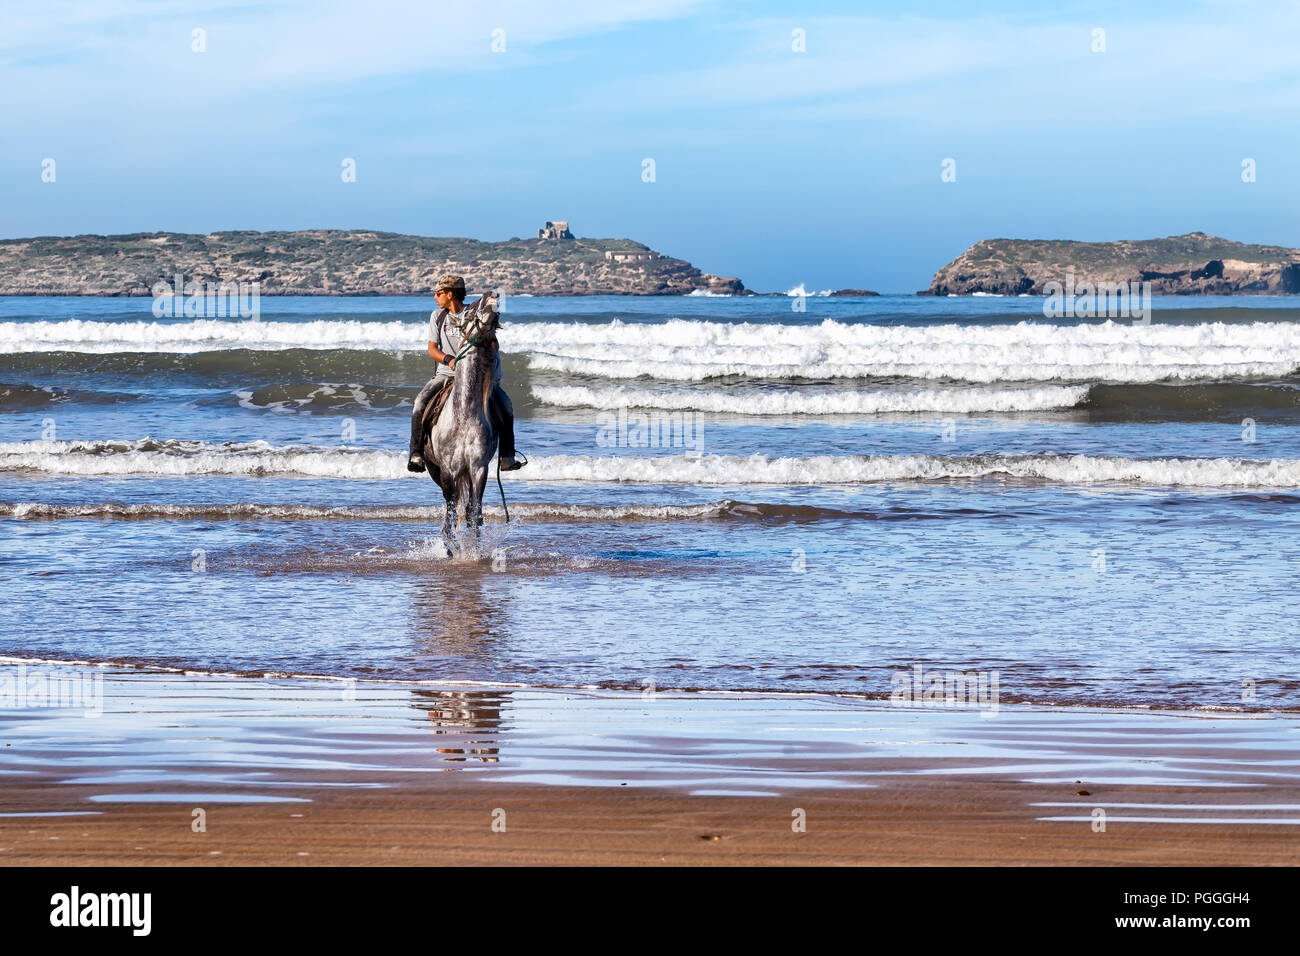 ESSAOUIRA, MOROCCO-DEC 22, 2012: Man riding a horse in the ocean waves at Essaouira, Morocco. Horseback riding is a popular activity on the beach, bot Stock Photo